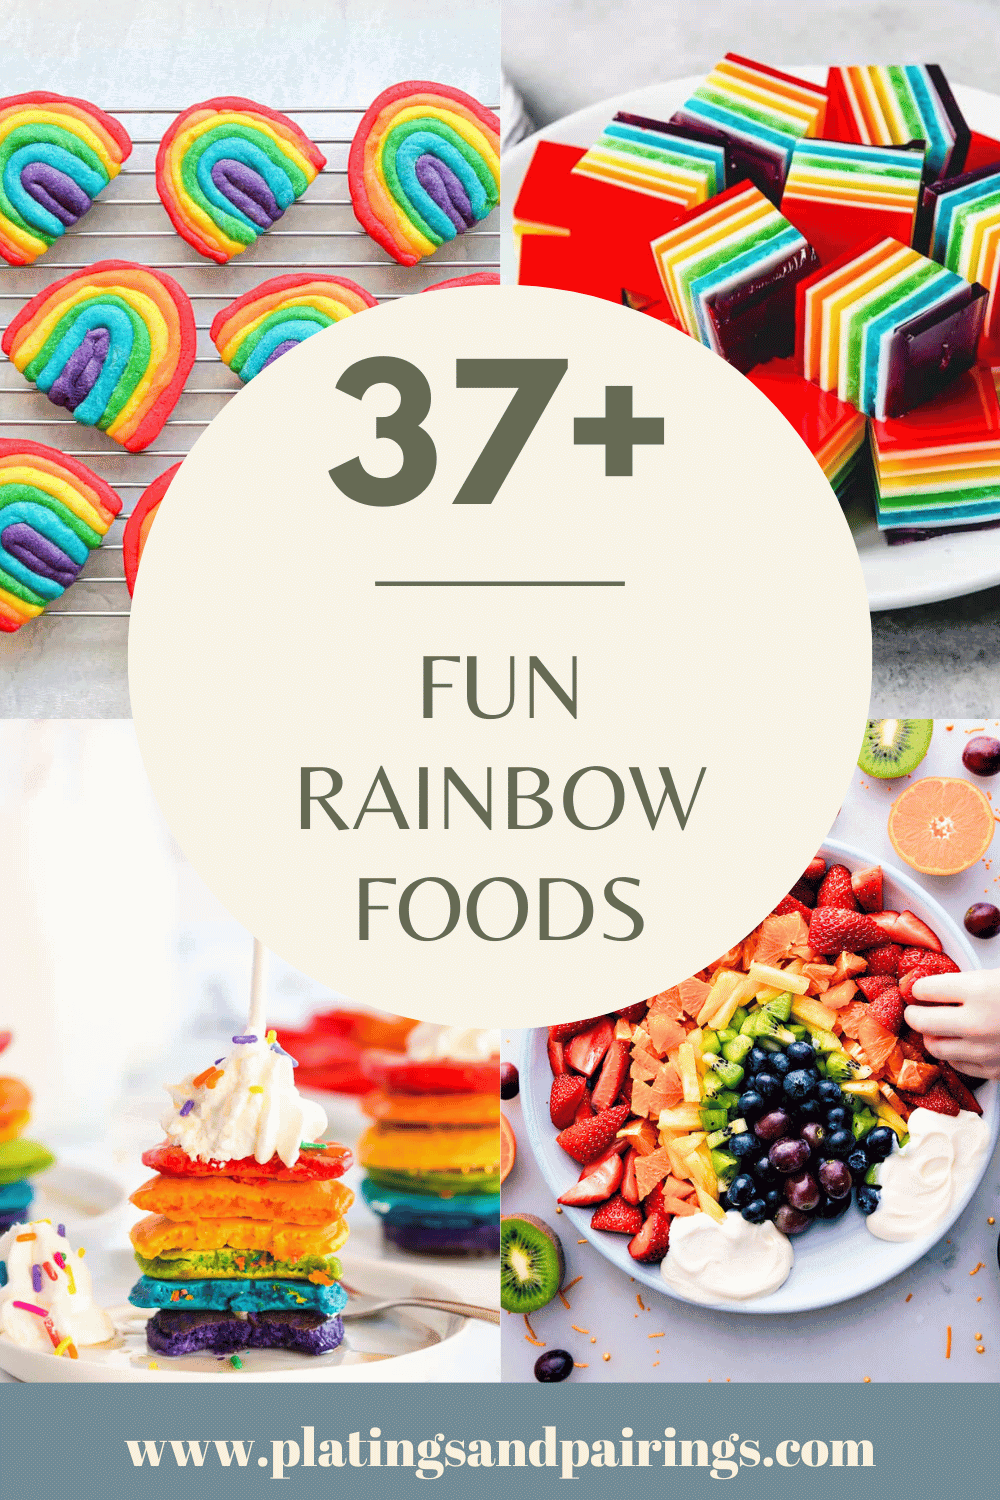 Collage of rainbow foods with text overlay.